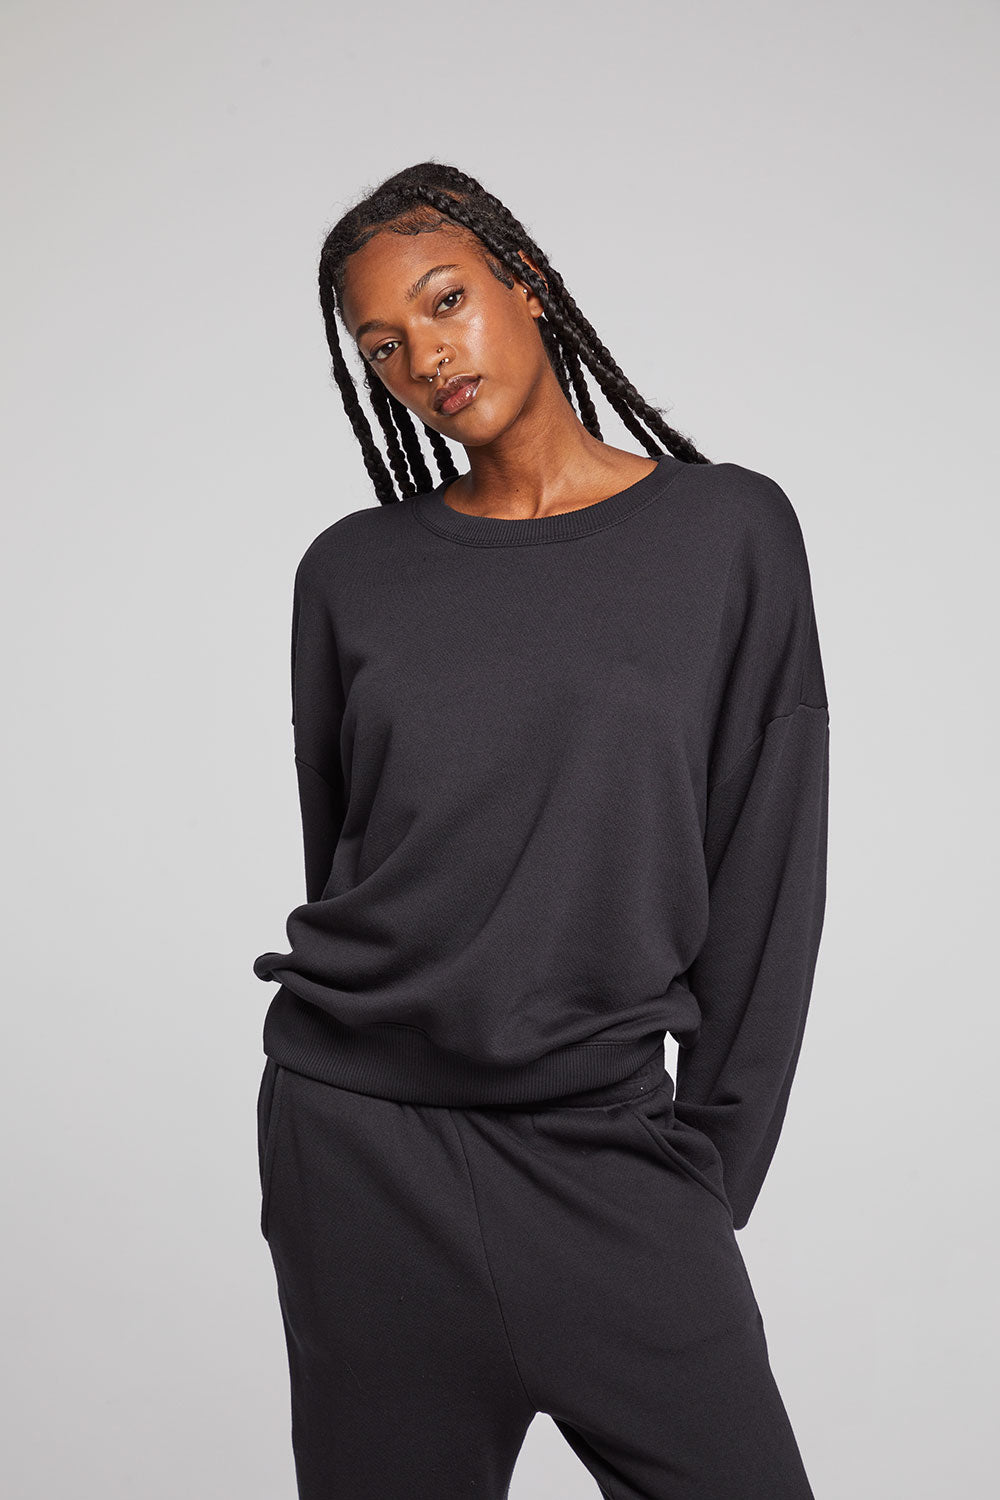 Casbah Licorice Pullover WOMENS chaserbrand